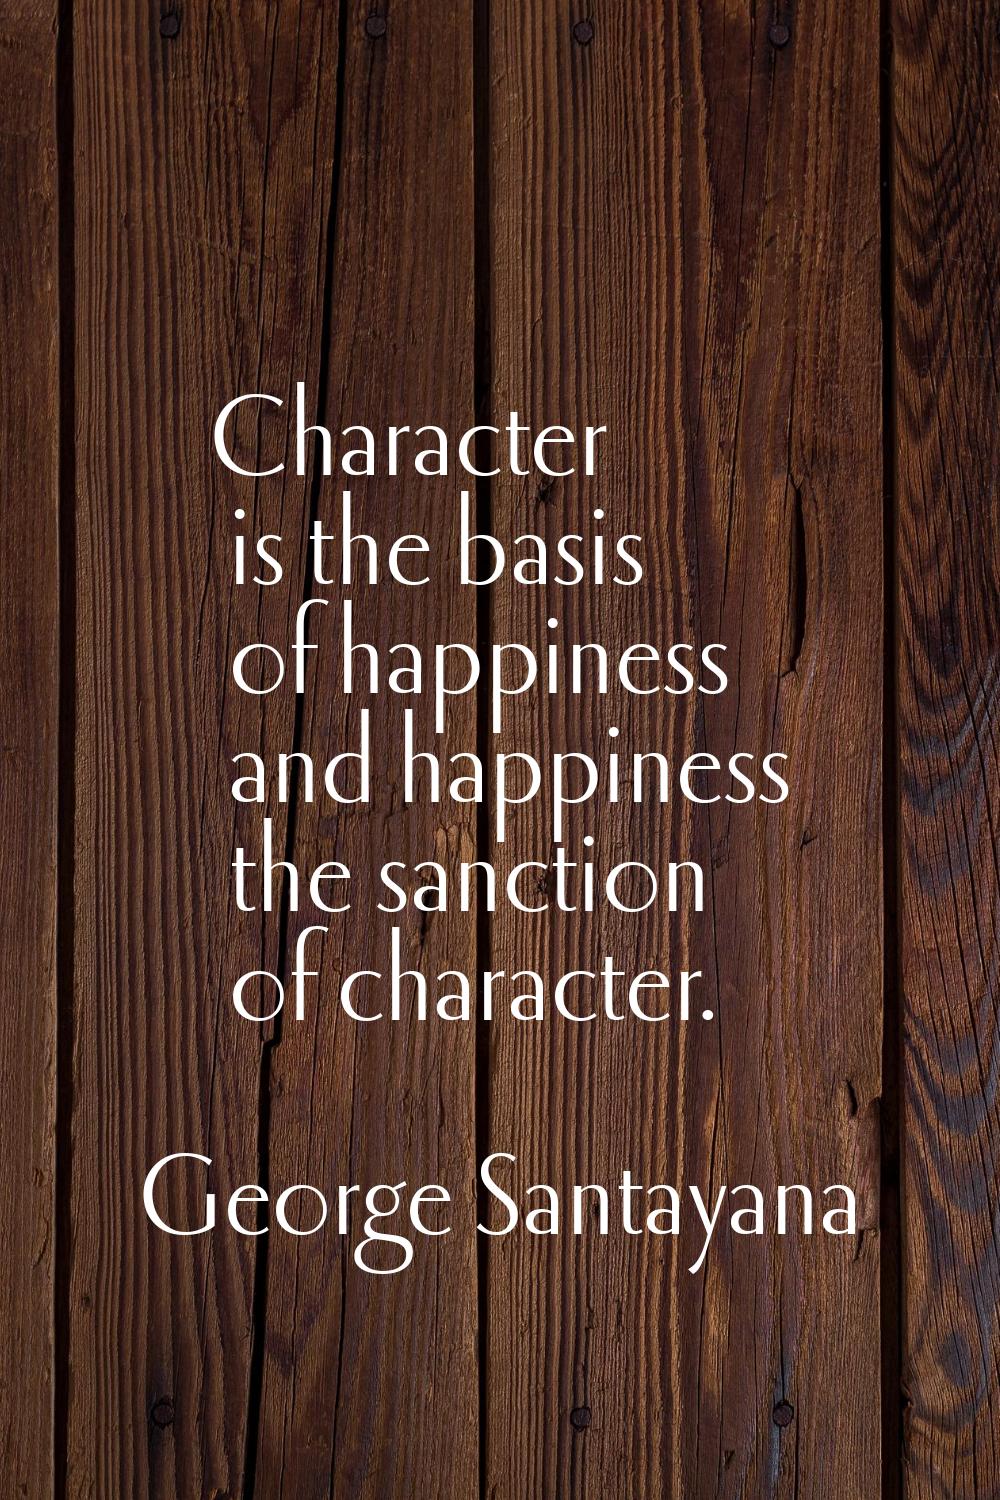 Character is the basis of happiness and happiness the sanction of character.